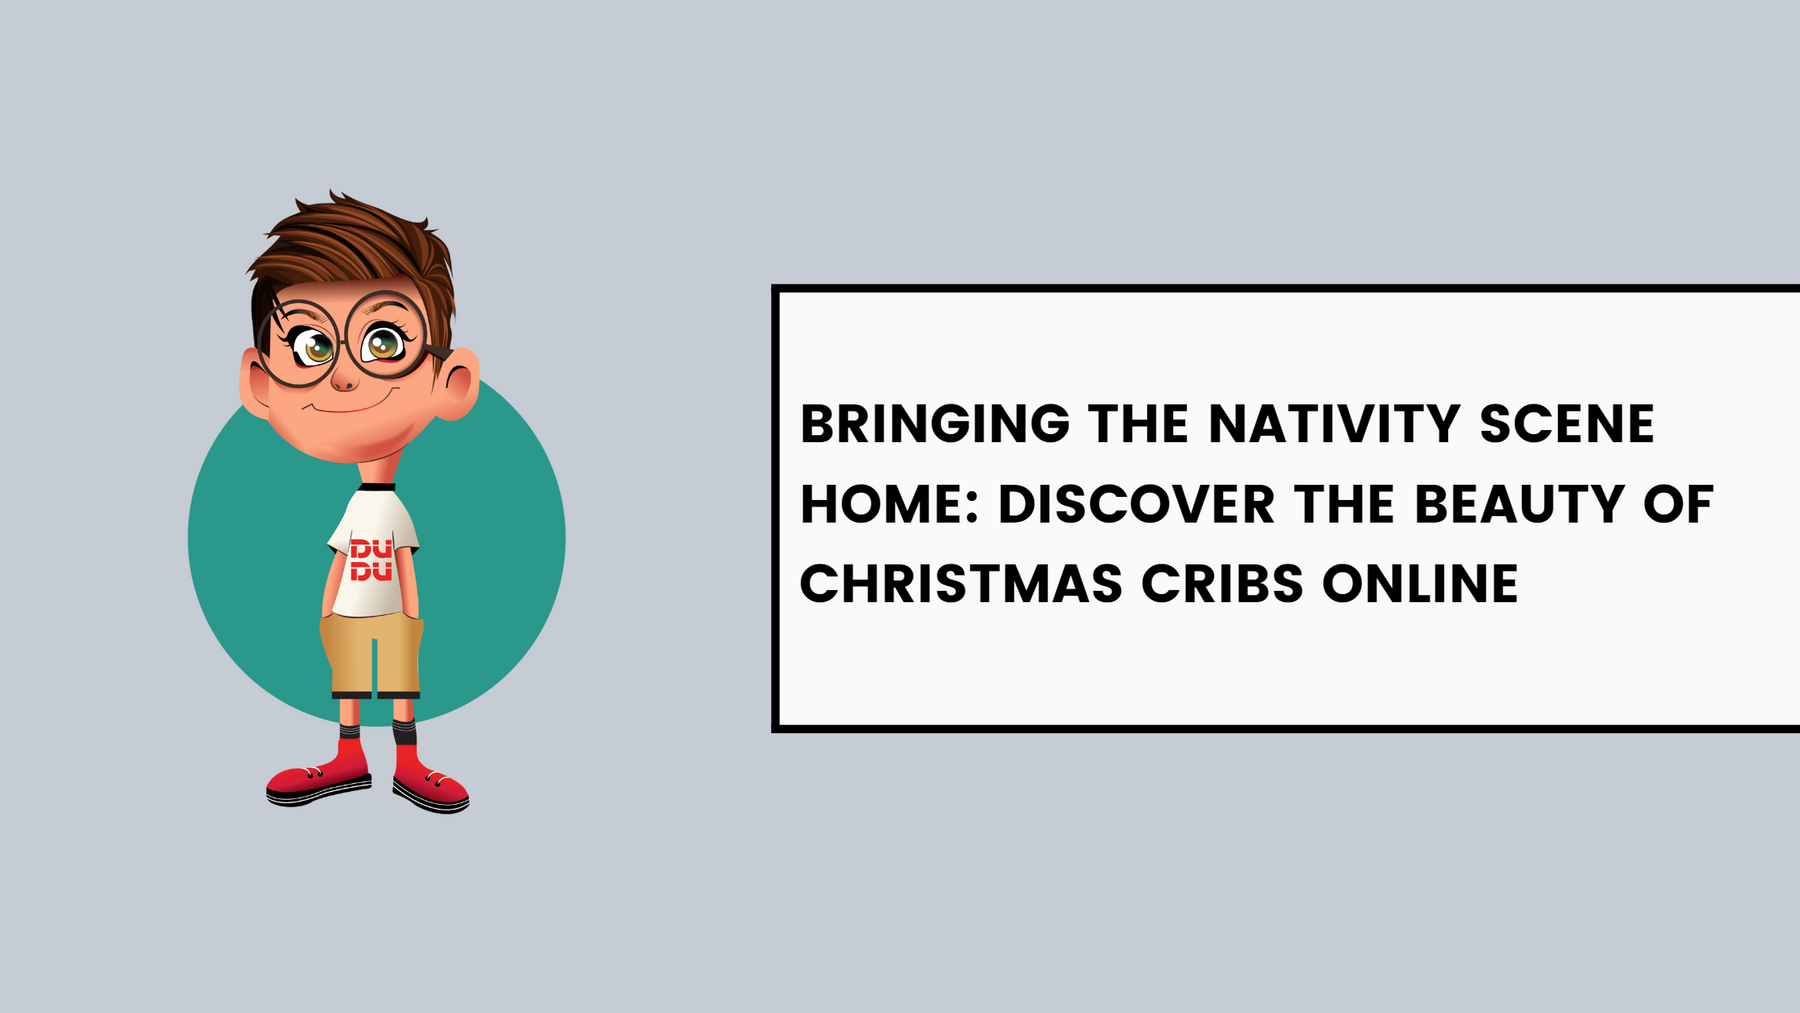 Bringing the Nativity Scene Home: Discover the Beauty of Christmas Cribs Online